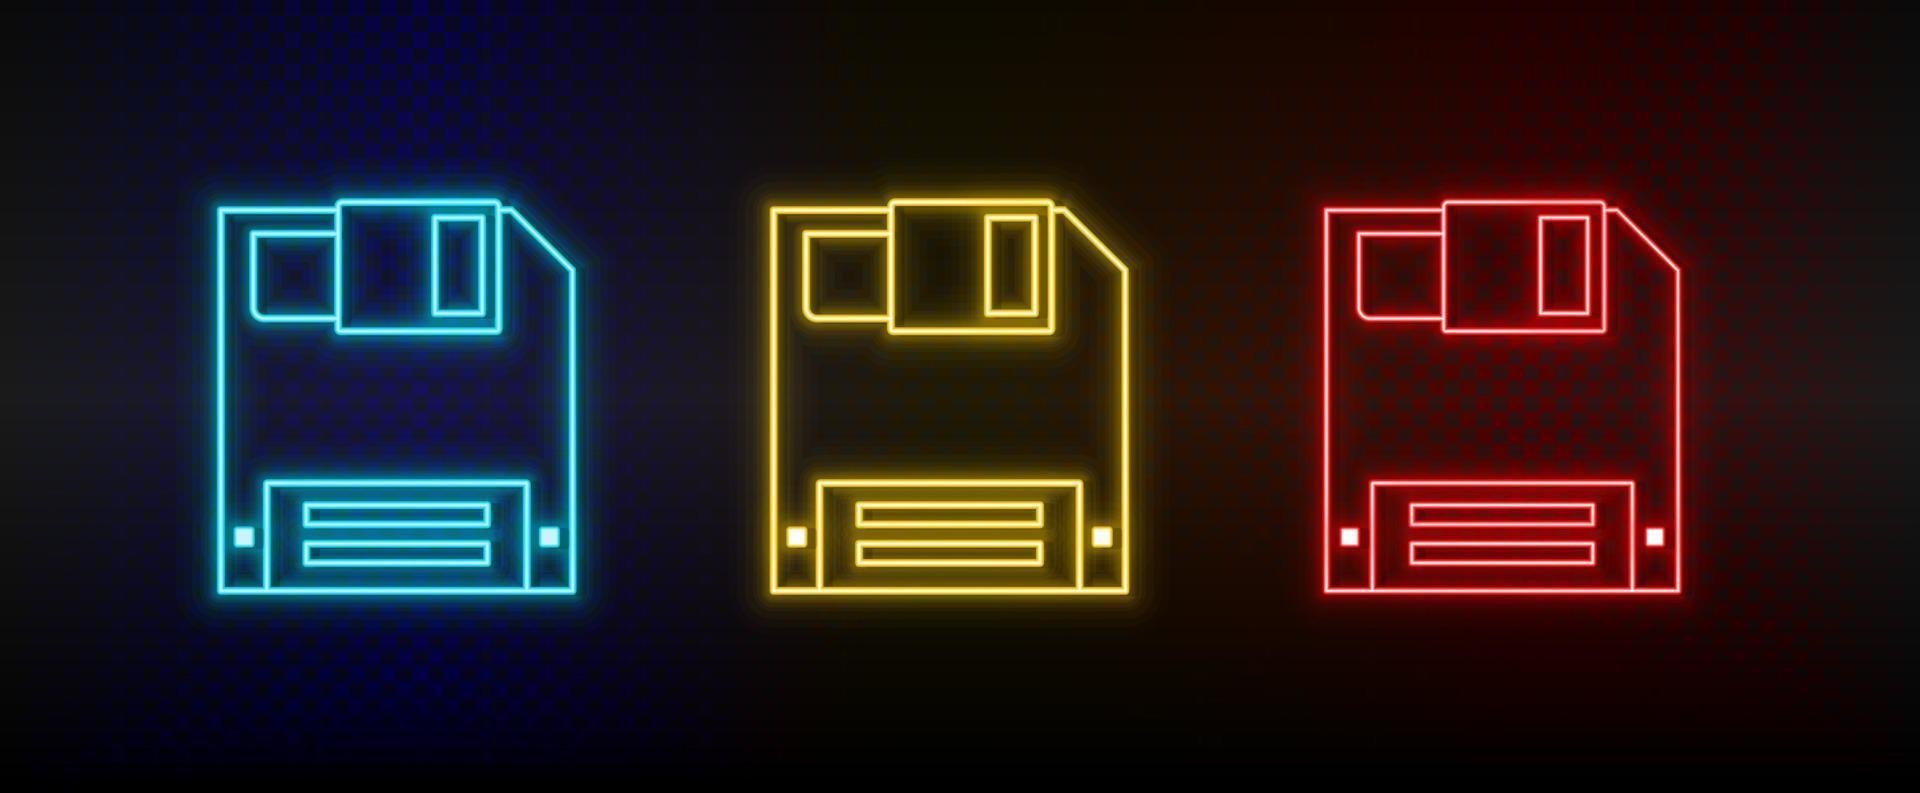 Neon icon set Card. Set of red, blue, yellow neon vector icon on transparency dark background